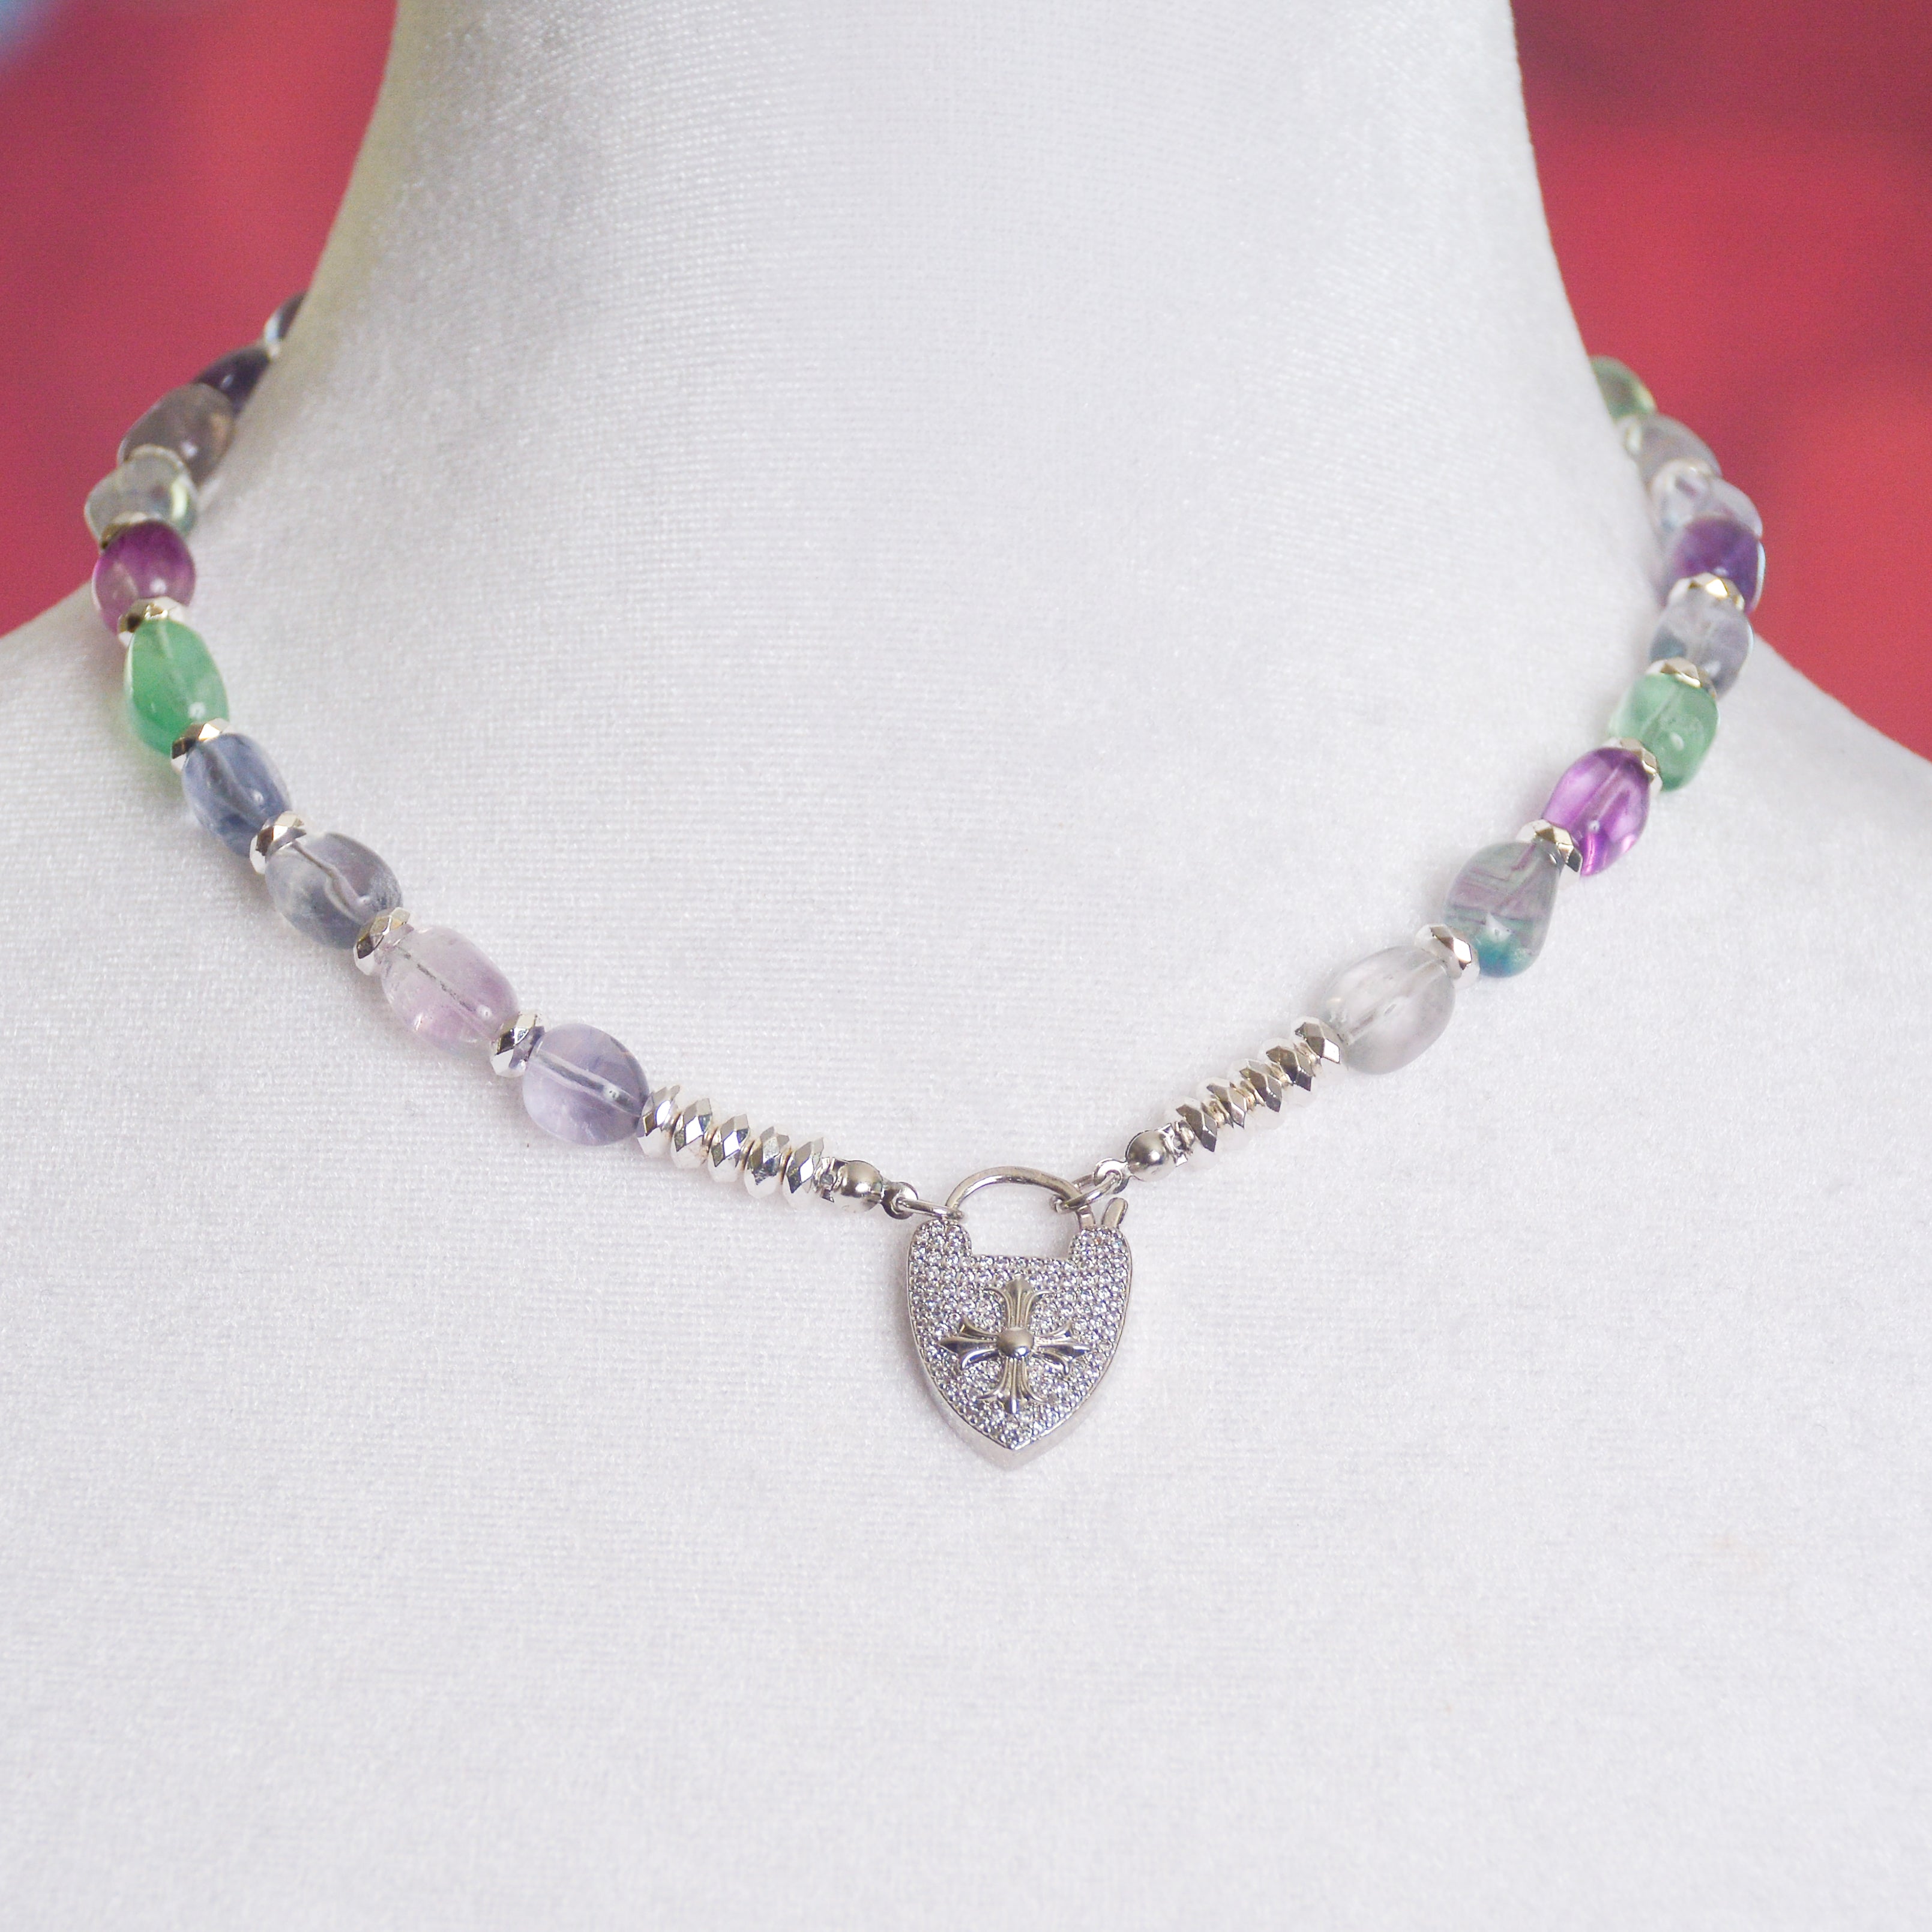 Focused Heart Charm: Fluorite Necklace with Heart Lock Pendant